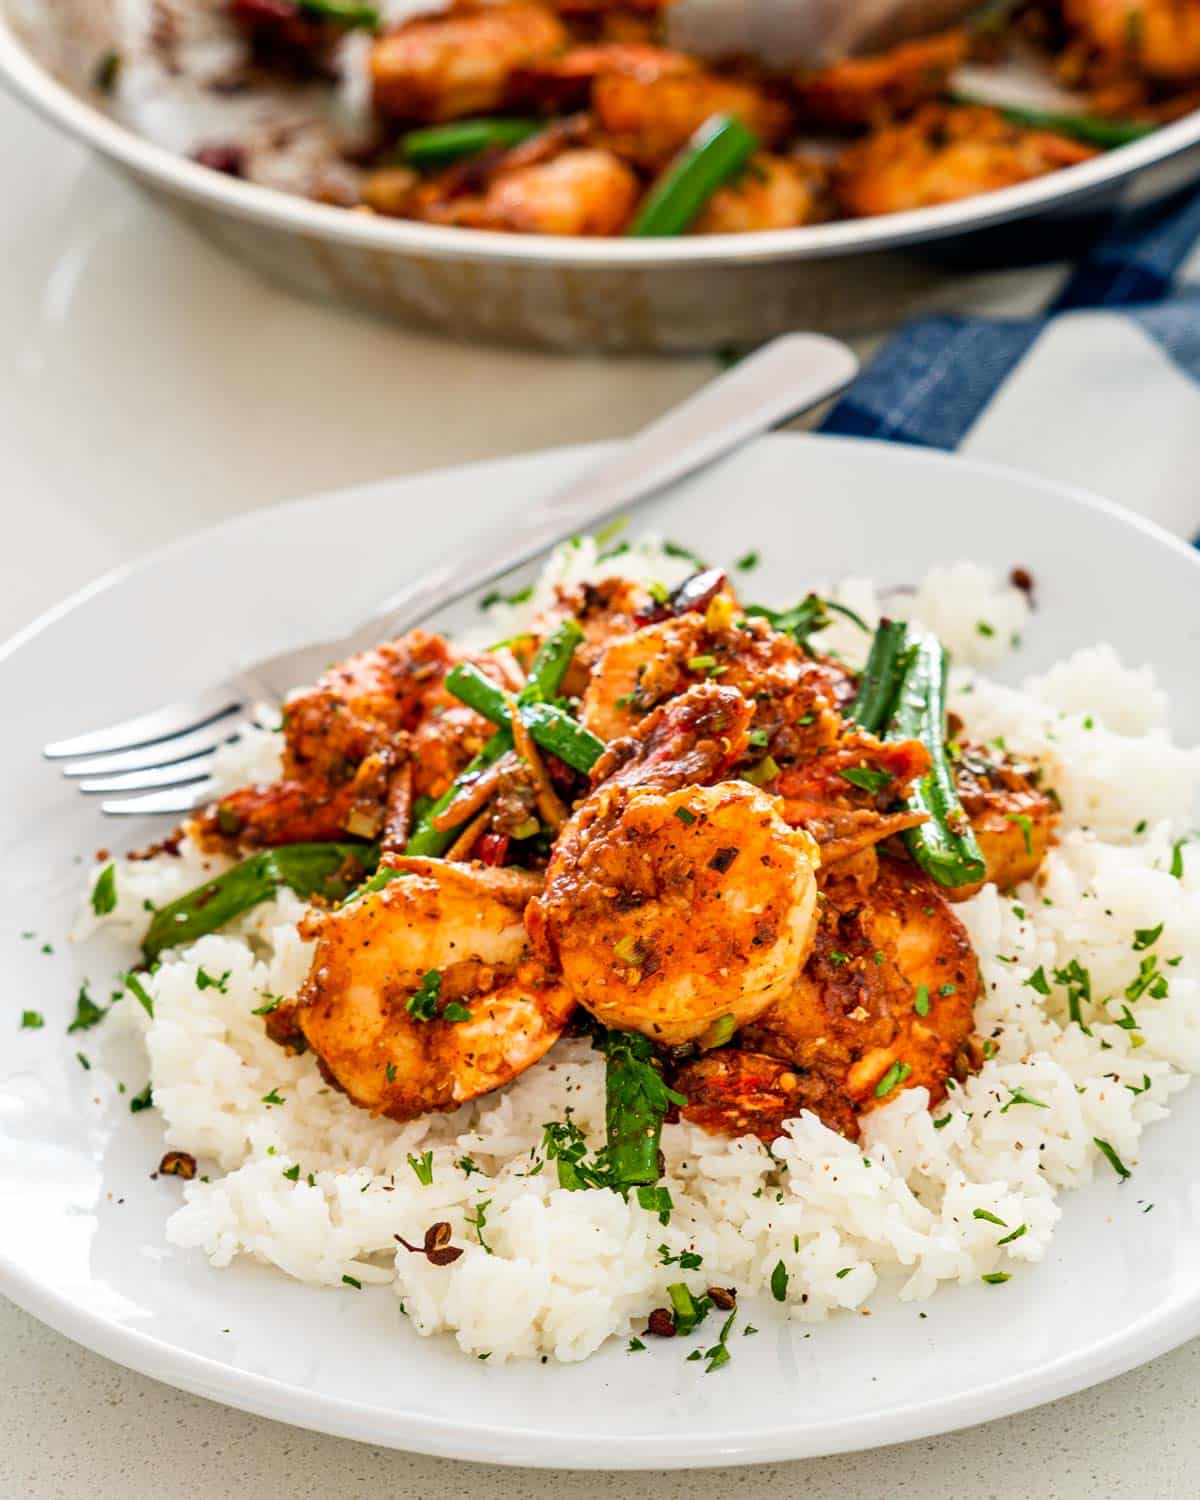 szechuan chili shrimp over a bed of rice on a white plate.